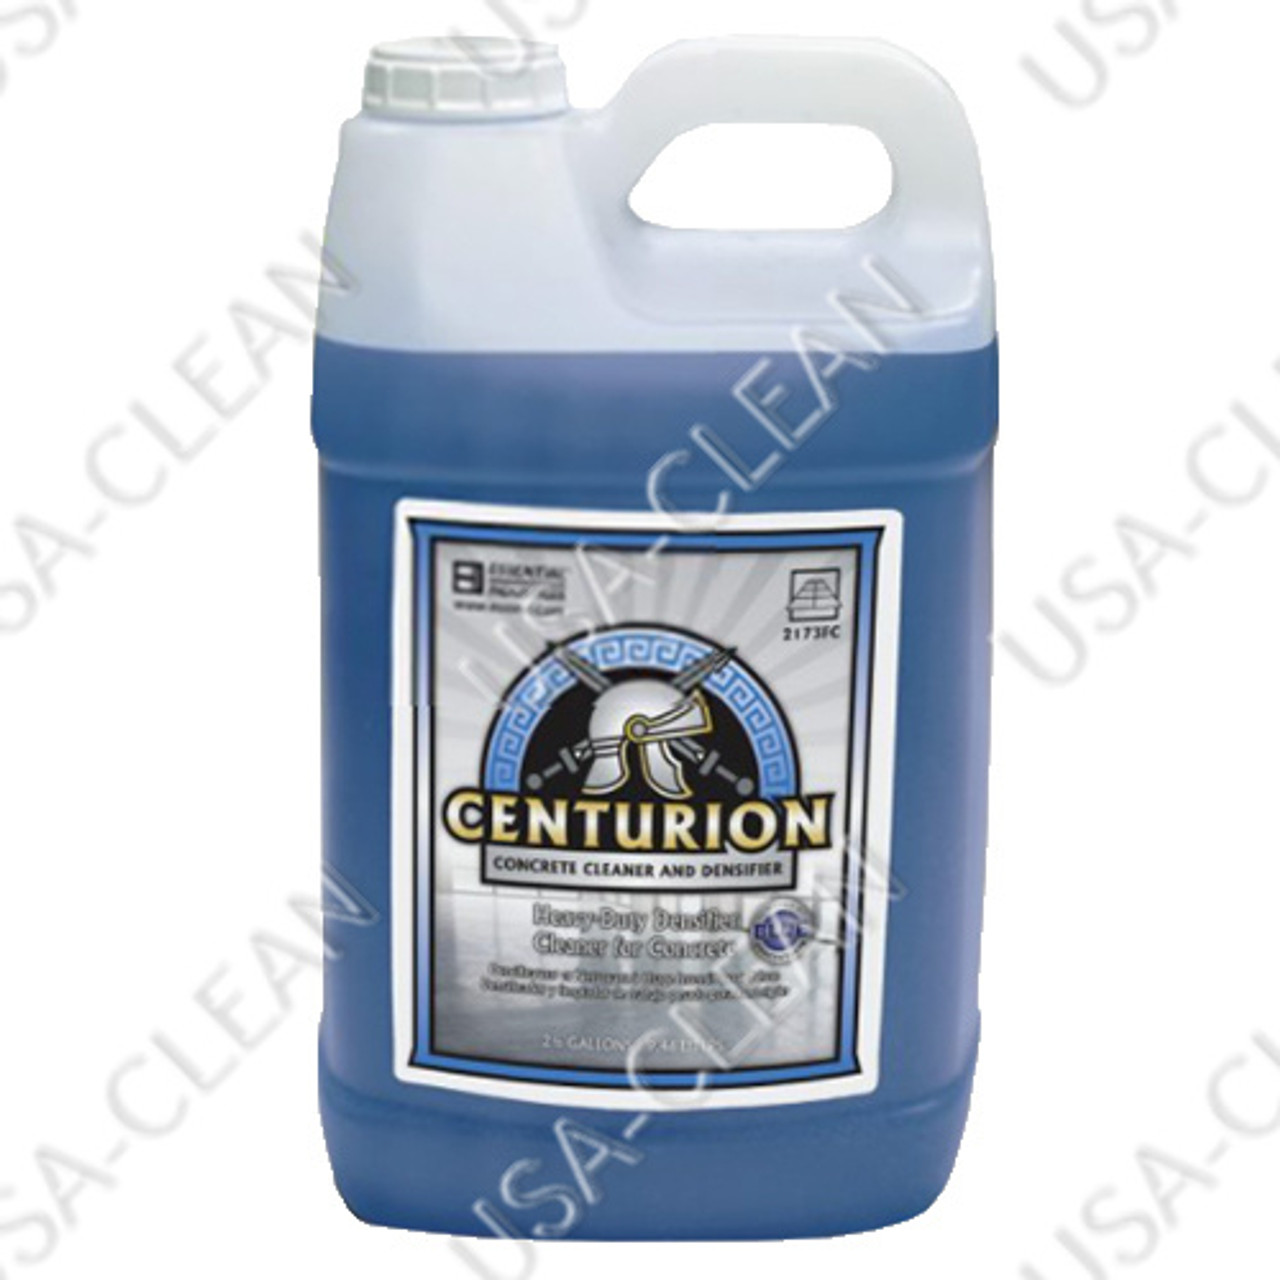 Centurion concrete cleaner and densifier (2 1/2 gallon) 250-2056 – Ships  Fast from Our Huge Inventory